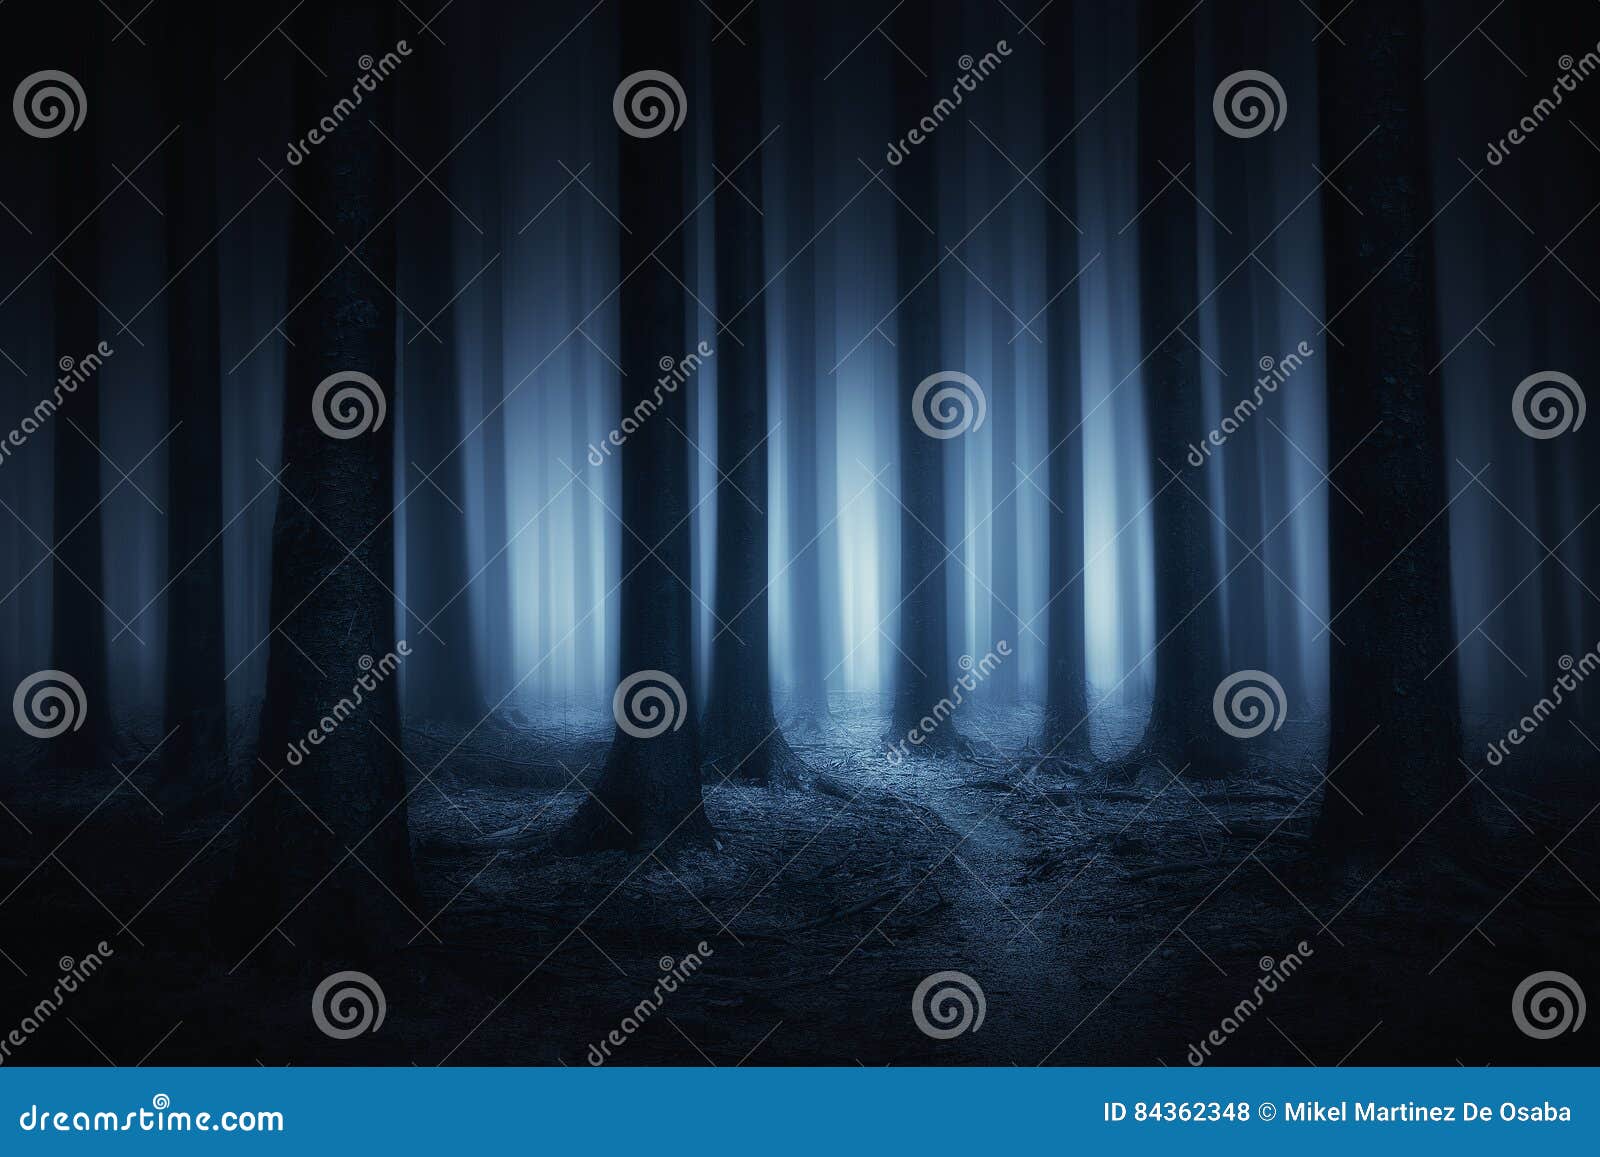 dark and scary forest at night